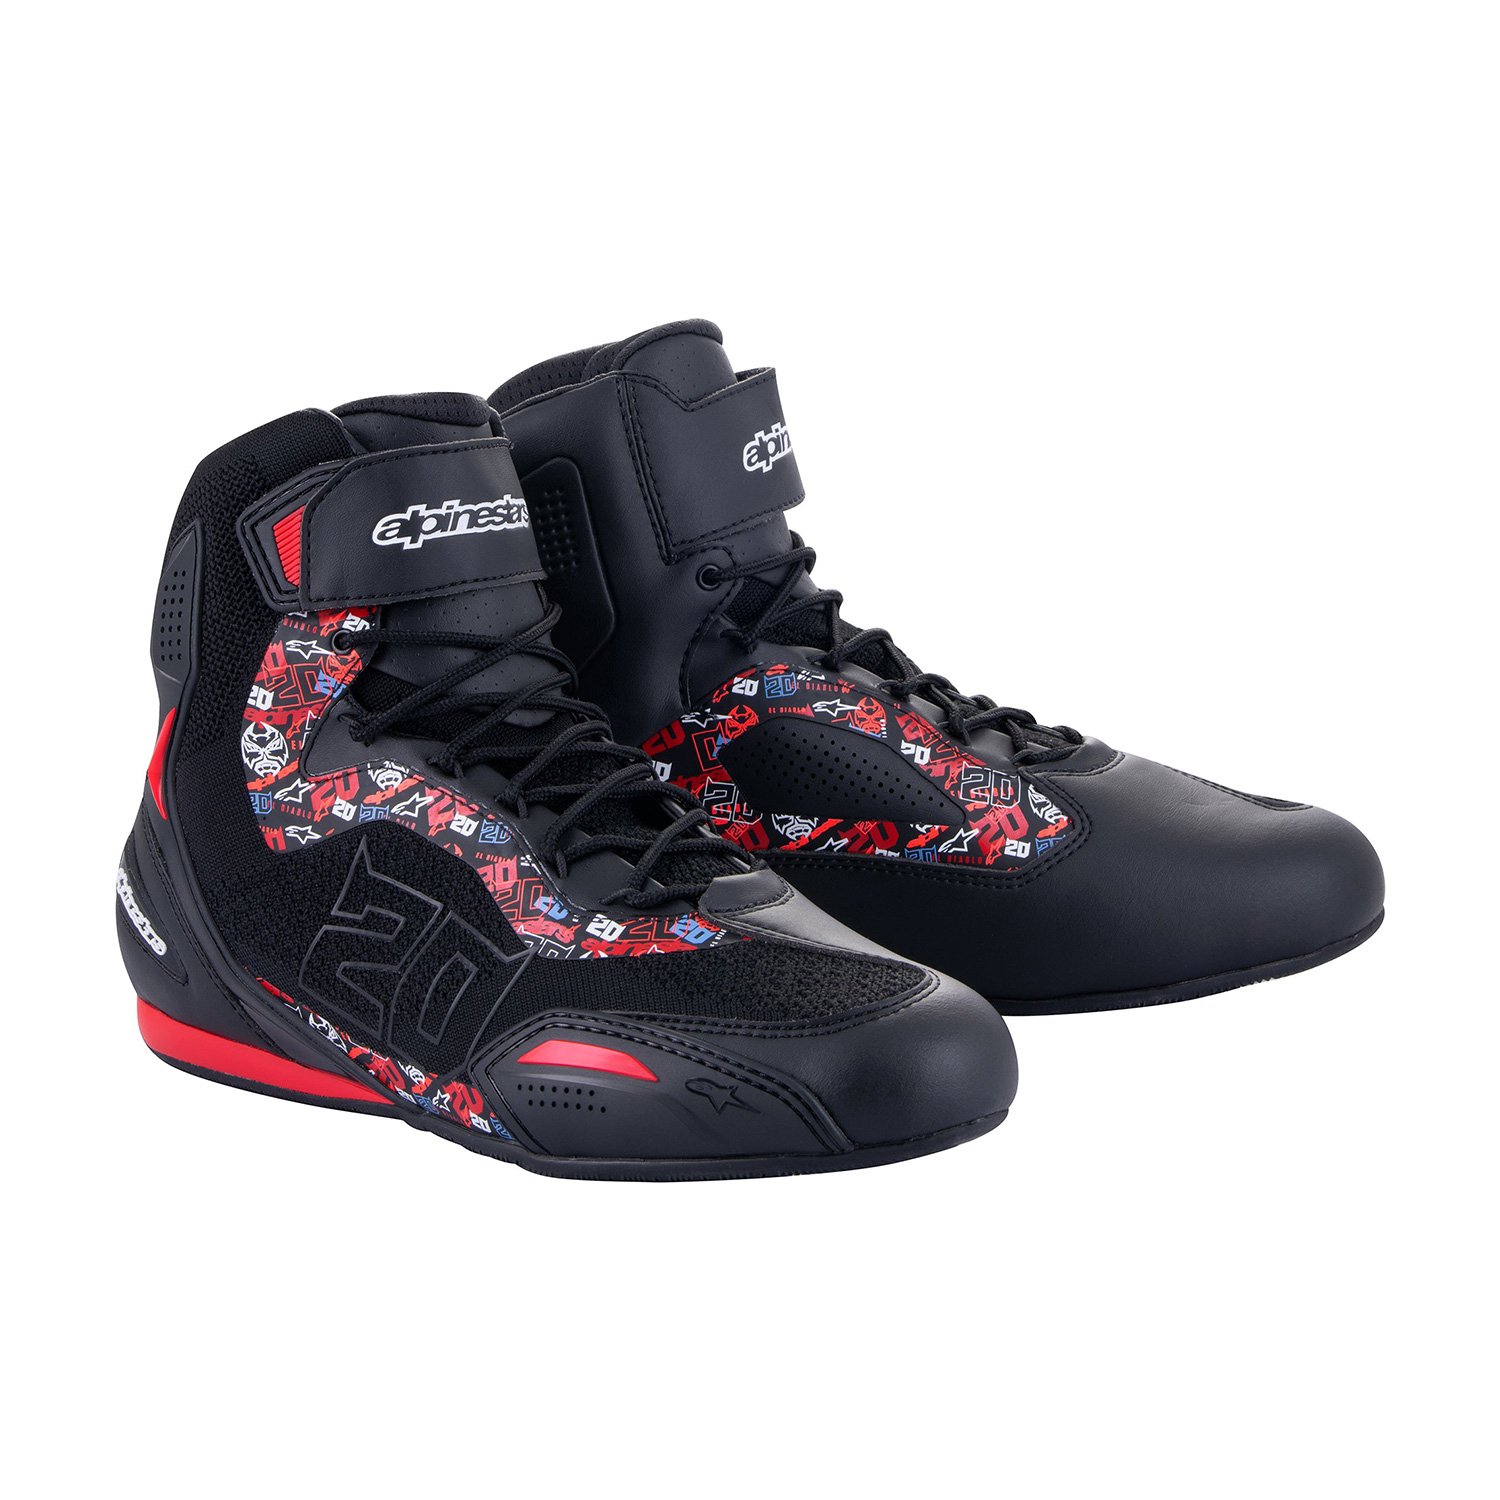 Image of Alpinestars FQ20 Faster-3 Rideknit Noir Bright Rouge Chaussures Taille US 8